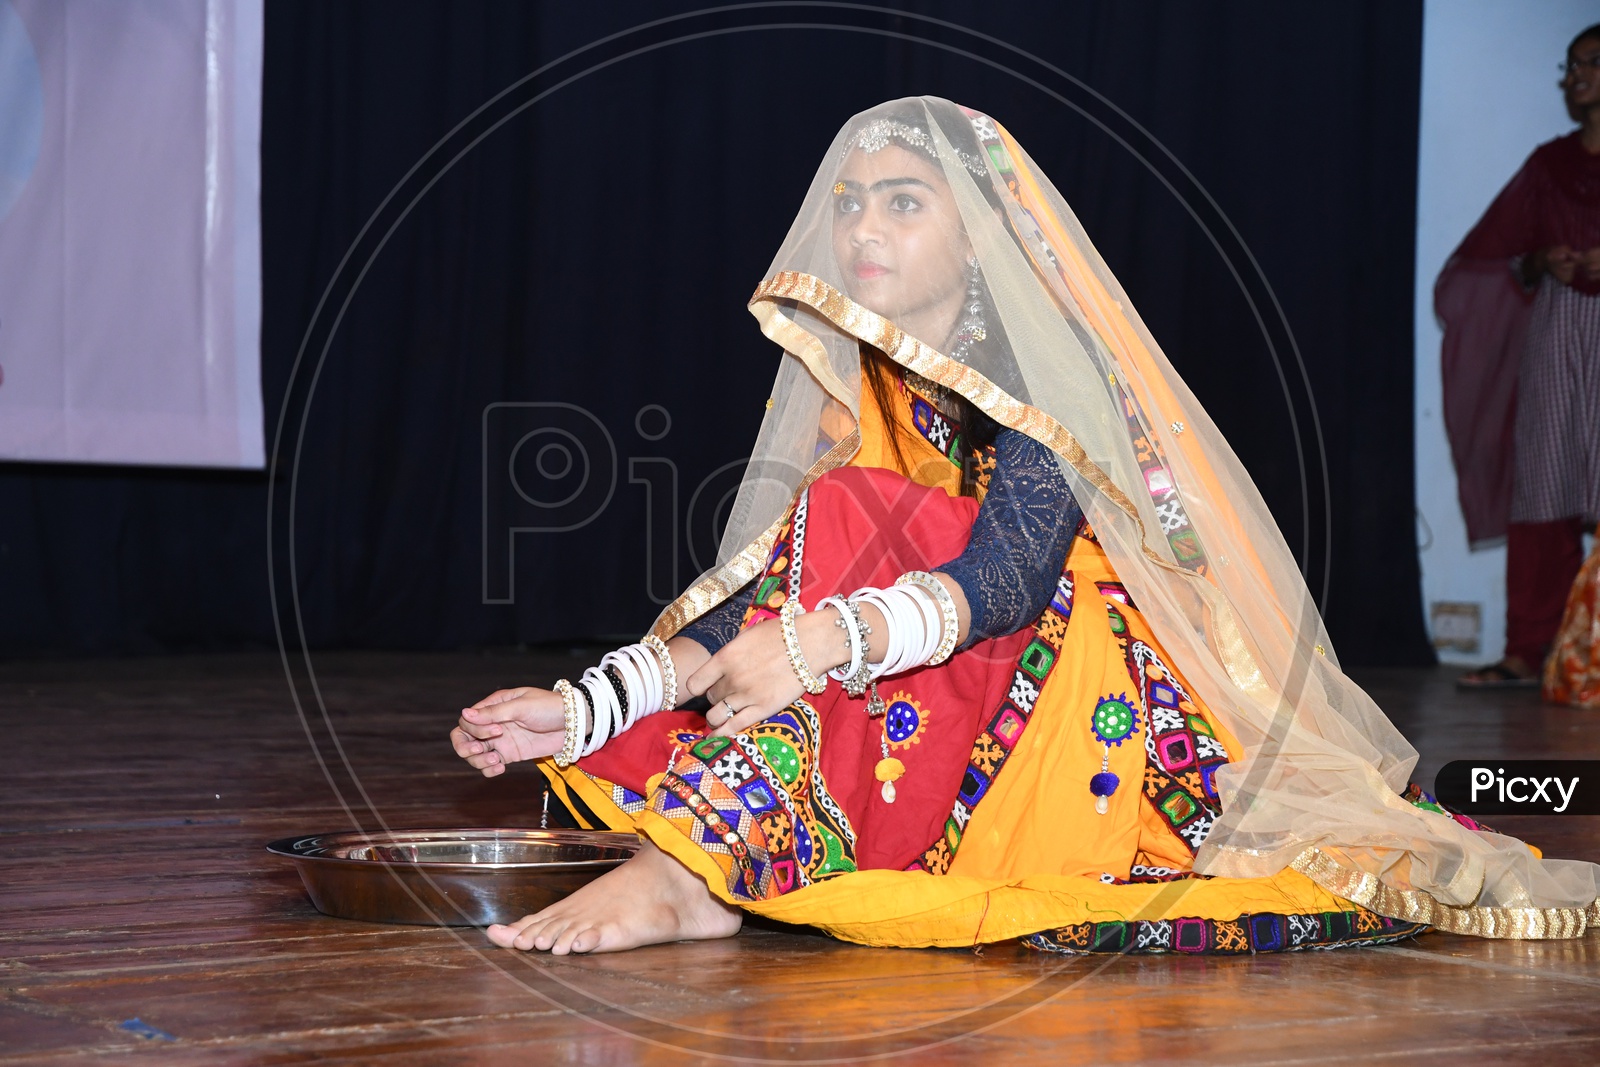 Indian Traditional Dancer on the stage during Yantharang in Vijayawada